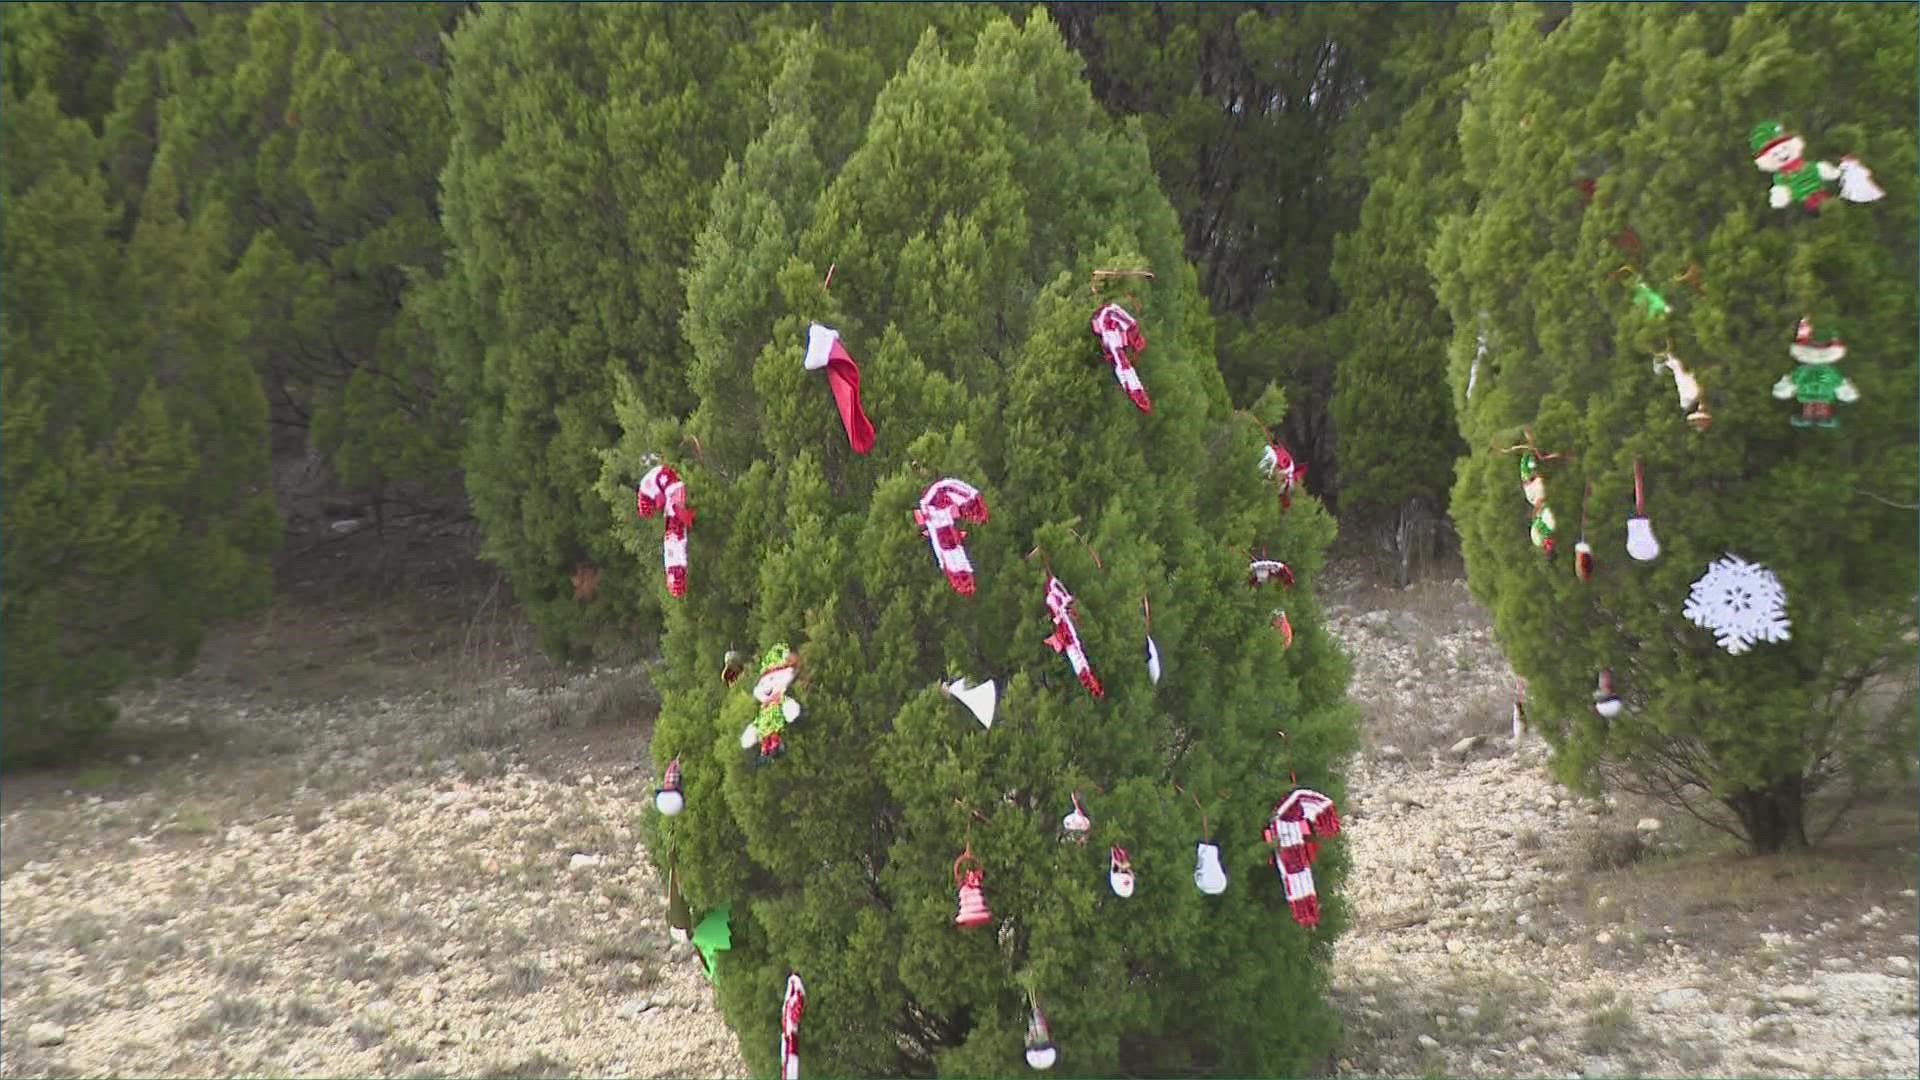 The Austin 360 tree tradition is back!